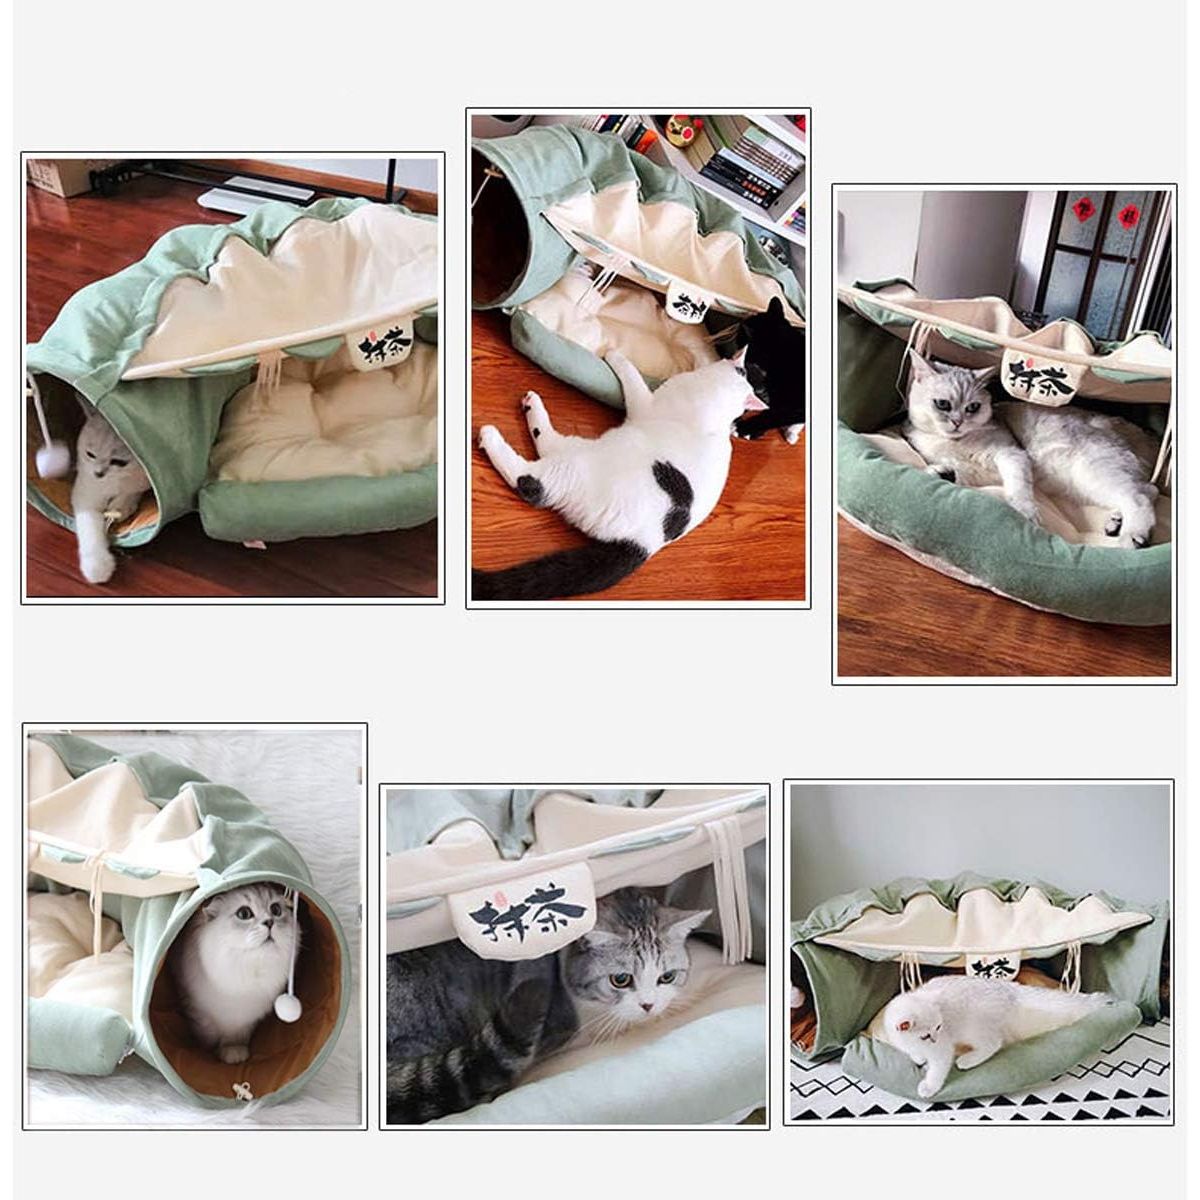 PurrfectPlay™ Pet Bed Tunnel - Petmagicworld